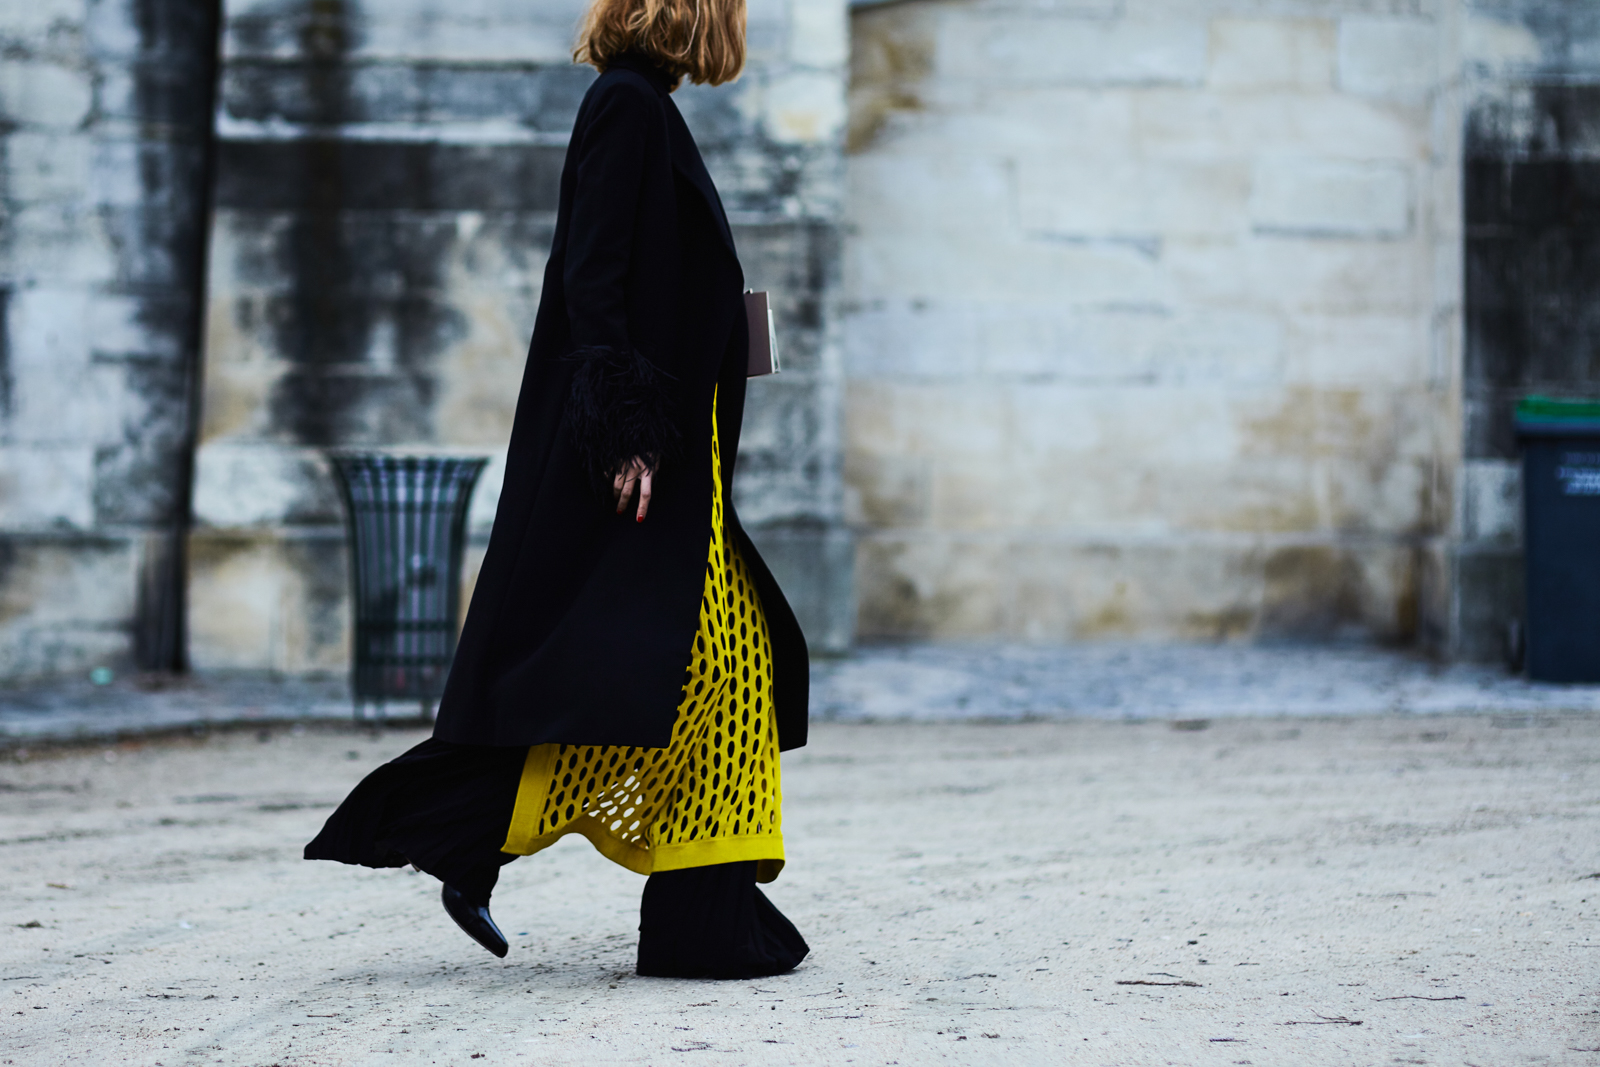 Candela Novembre wearing a yellow top and black long coat before the Valentino Fall/Winter 2016-2017 fashion show in Paris, France